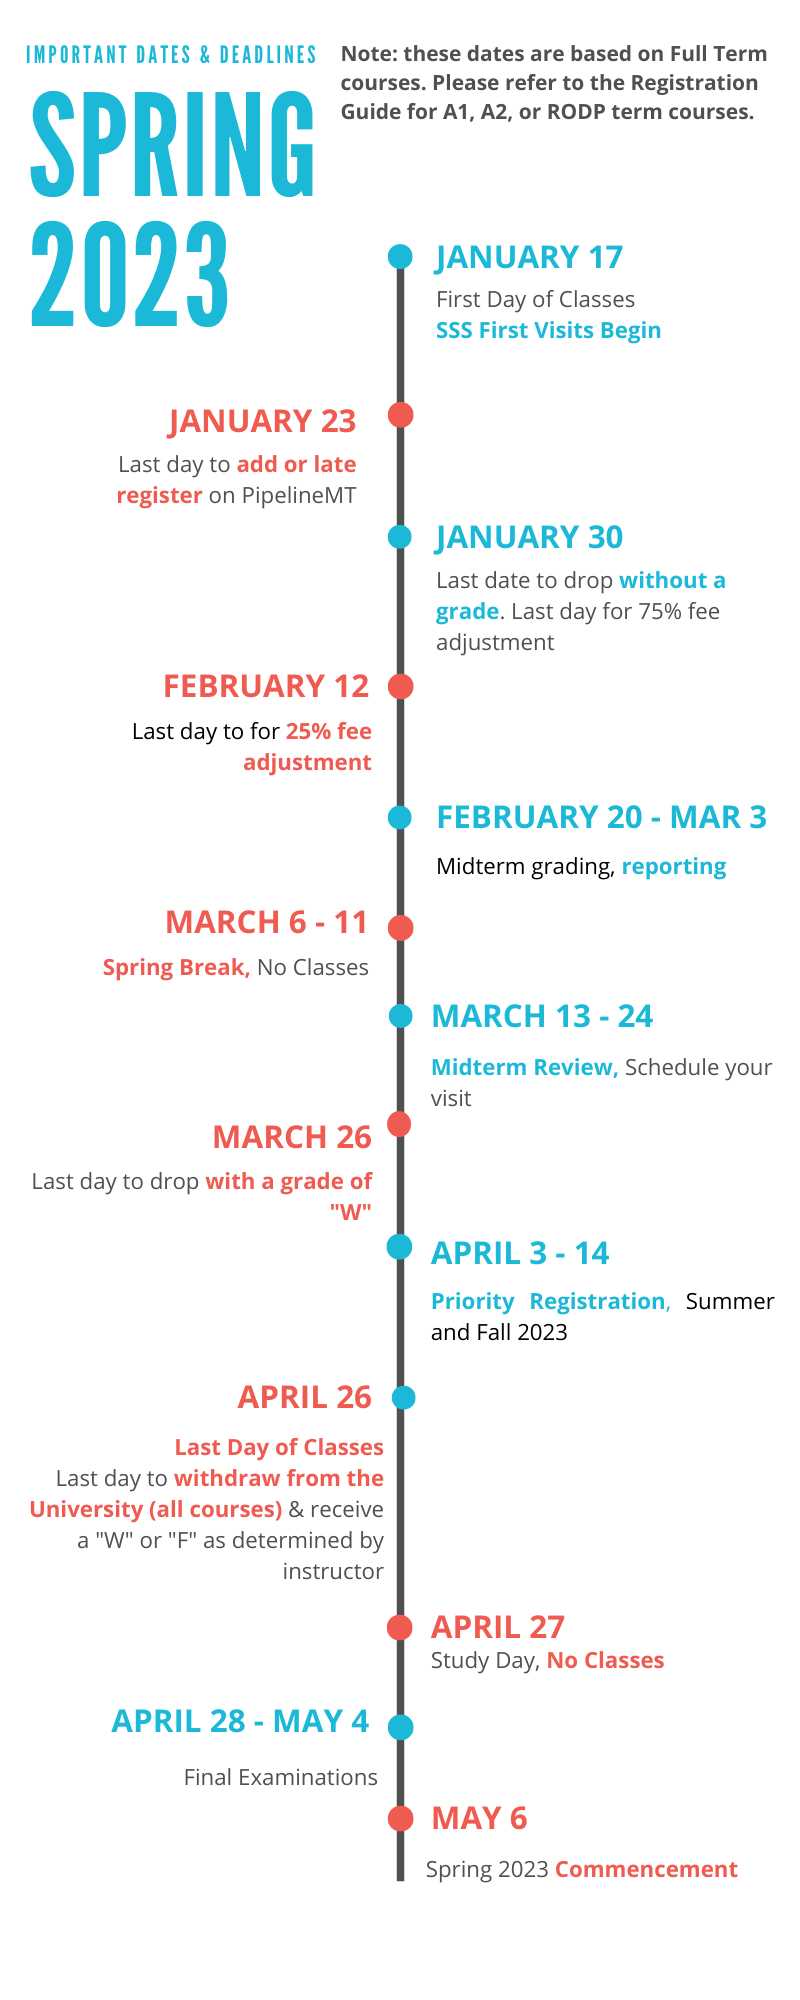 Spring 2023 Important Dates and Deadlines